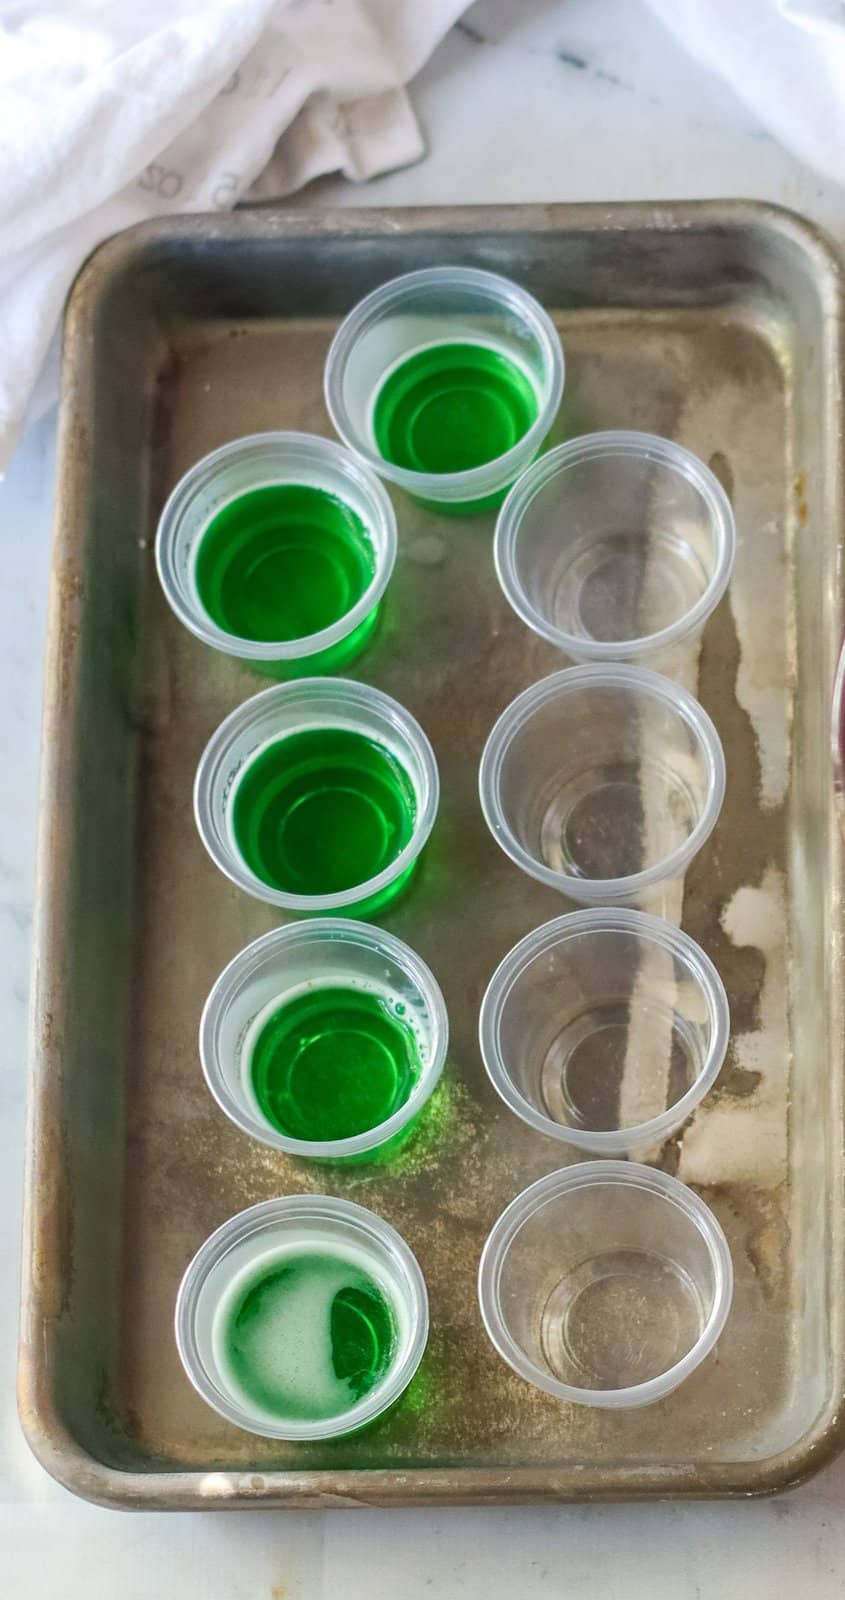 Green Jell-O being poured into plastic cups on tray.